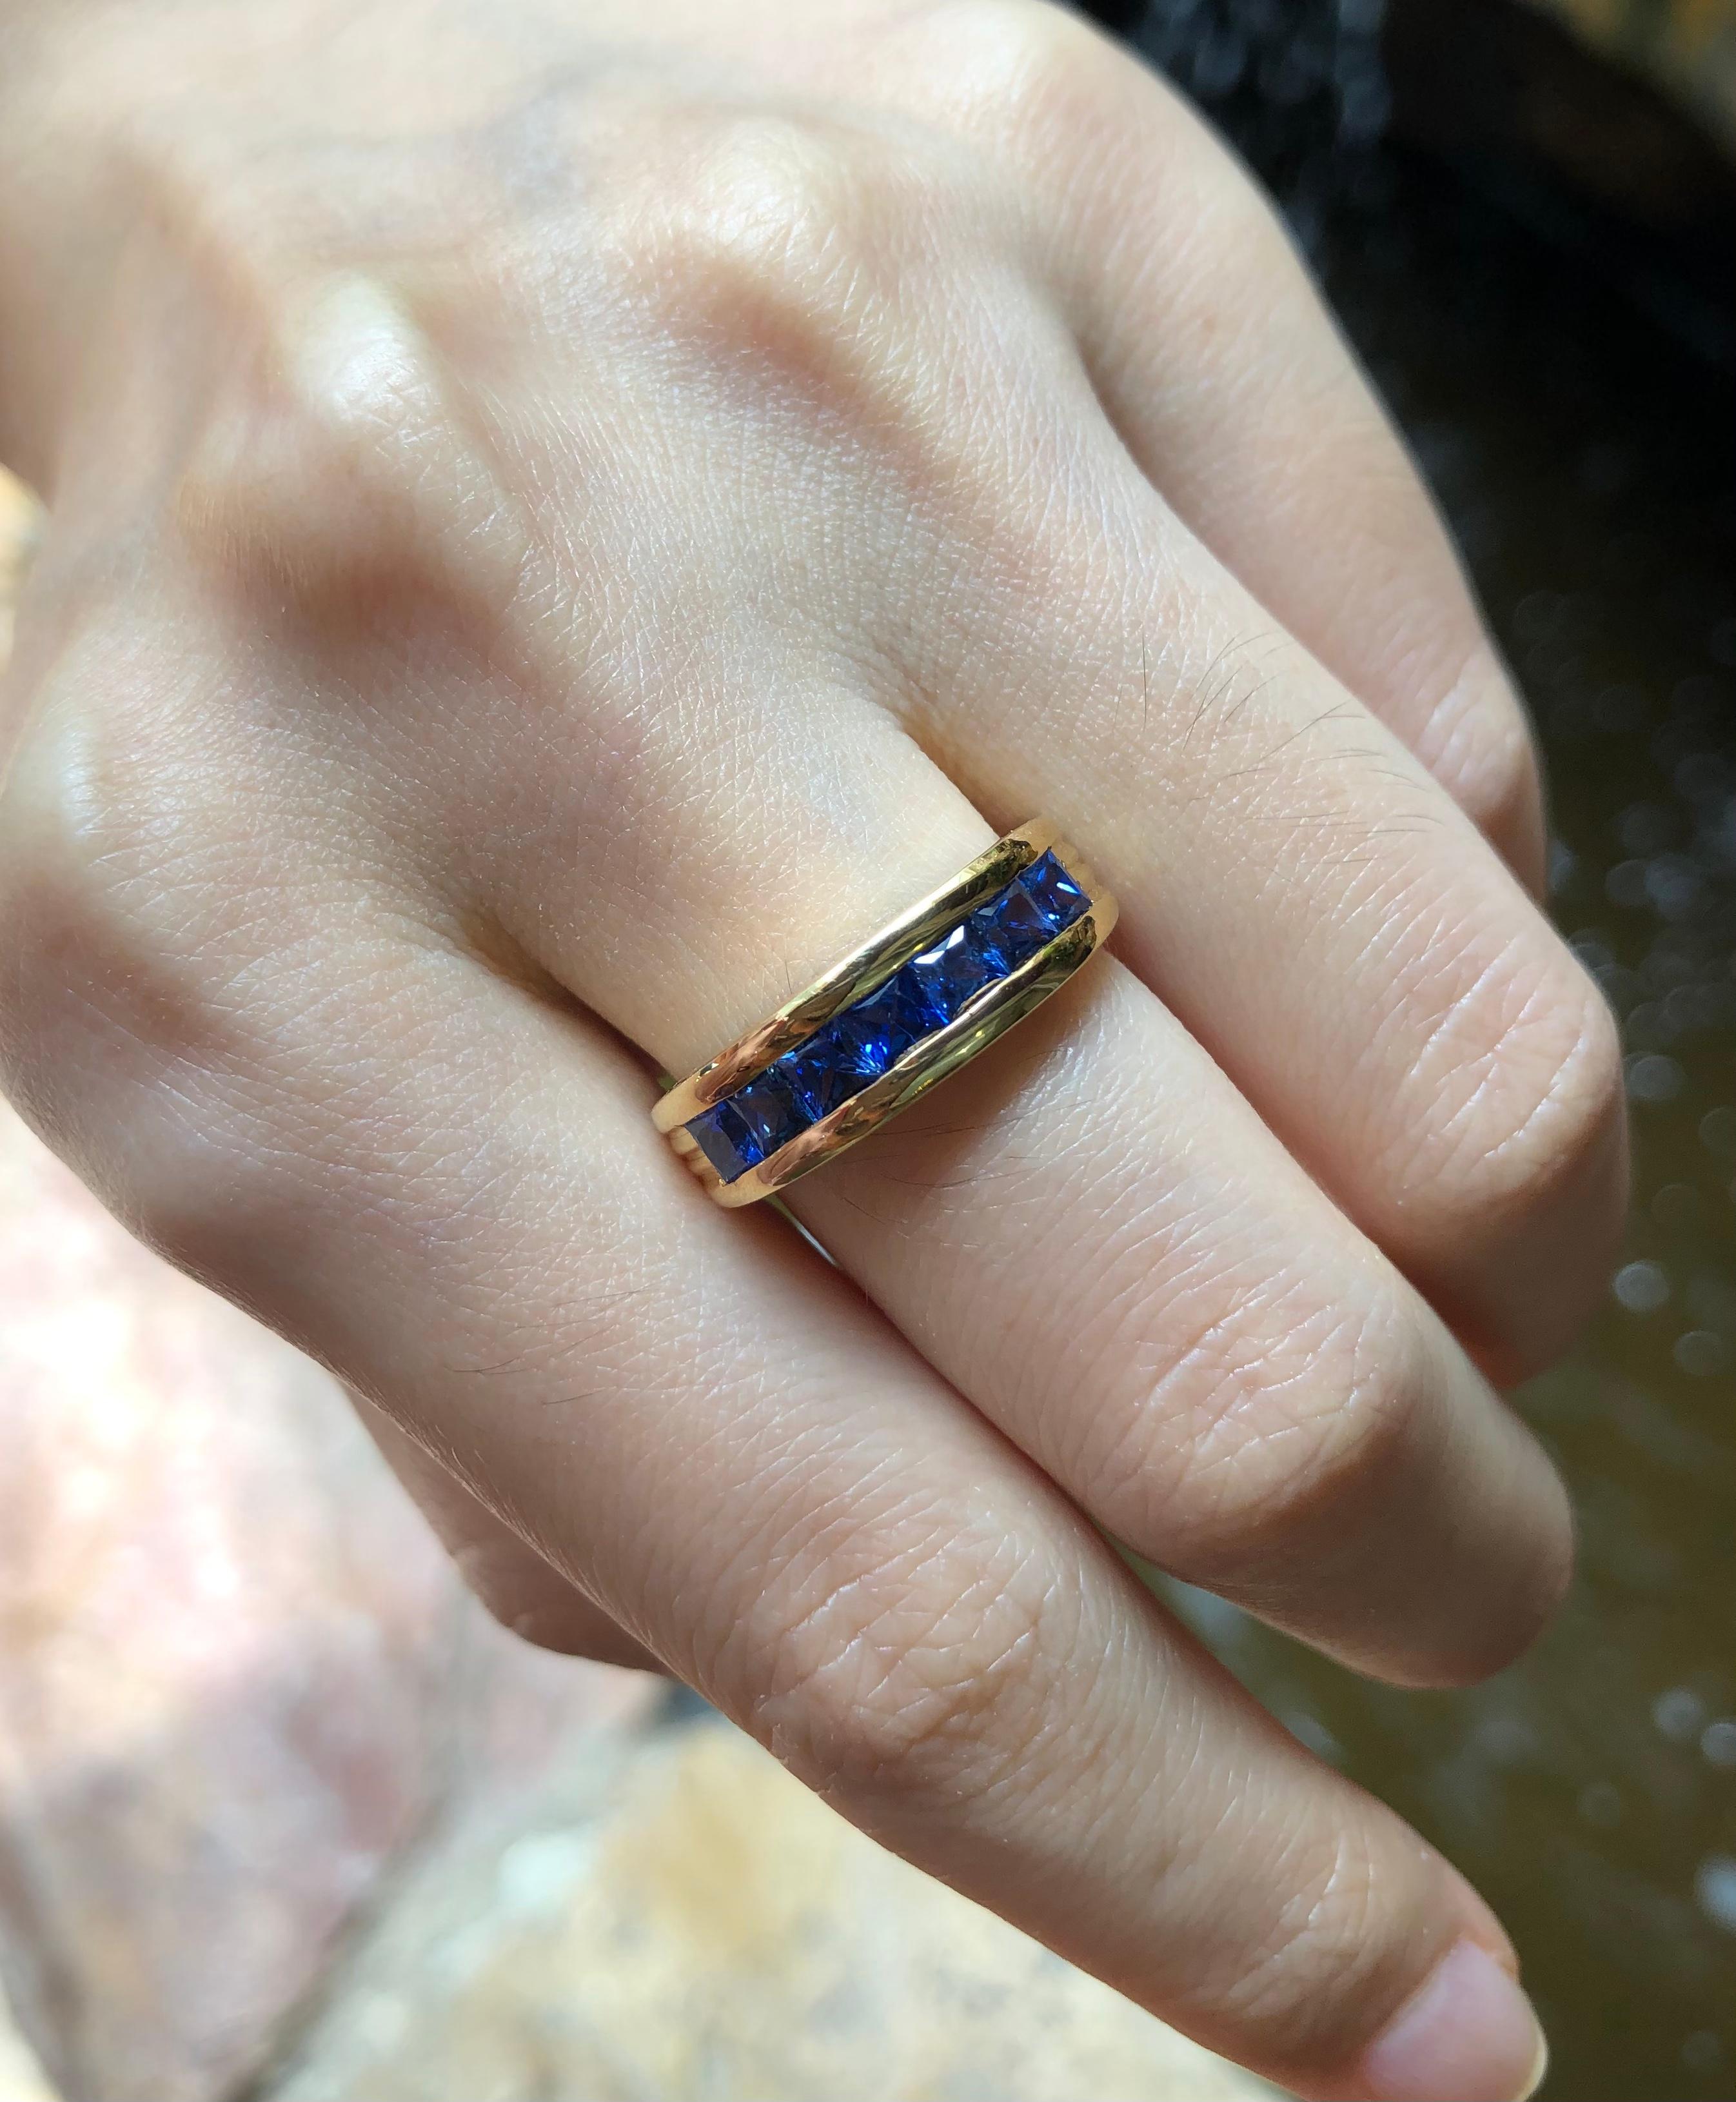 Blue Sapphire 1.48 carats Ring set in 18 Karat Gold Settings

Width:  2.3 cm 
Length: 0.6 cm
Ring Size: 54
Total Weight: 7.55 grams

